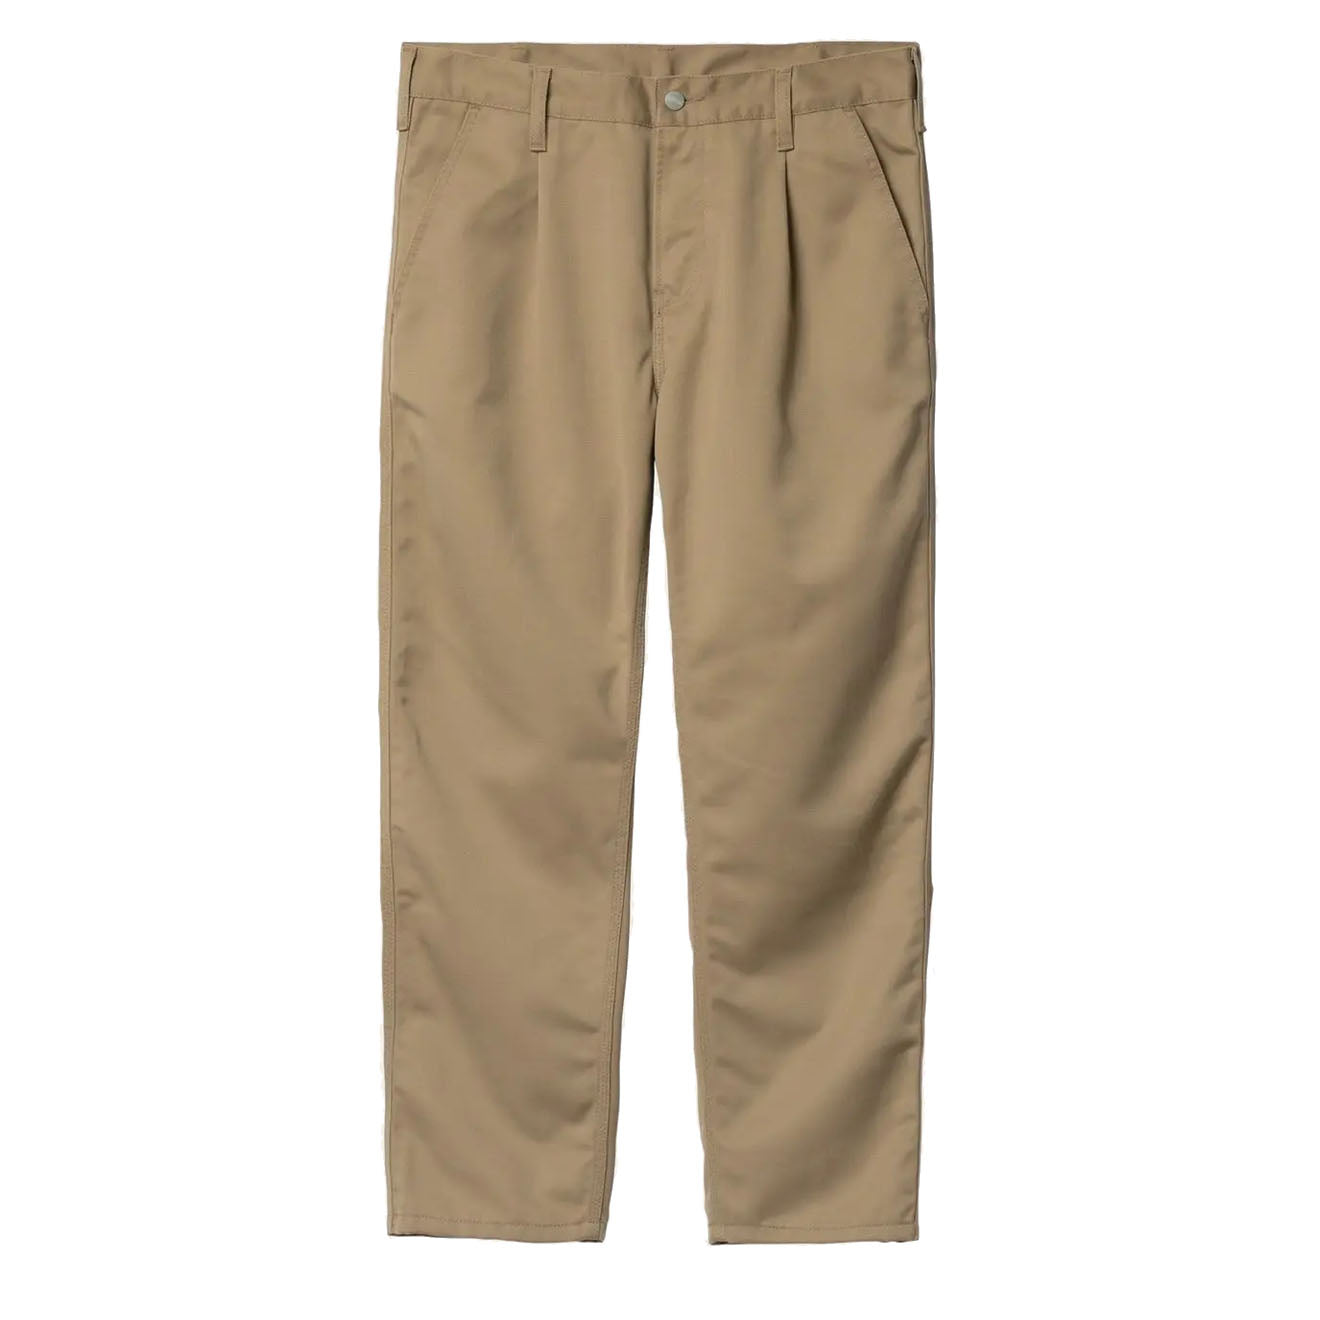 Carhartt WIP Abbott Pant Leather Stone Washed | The Sporting Lodge